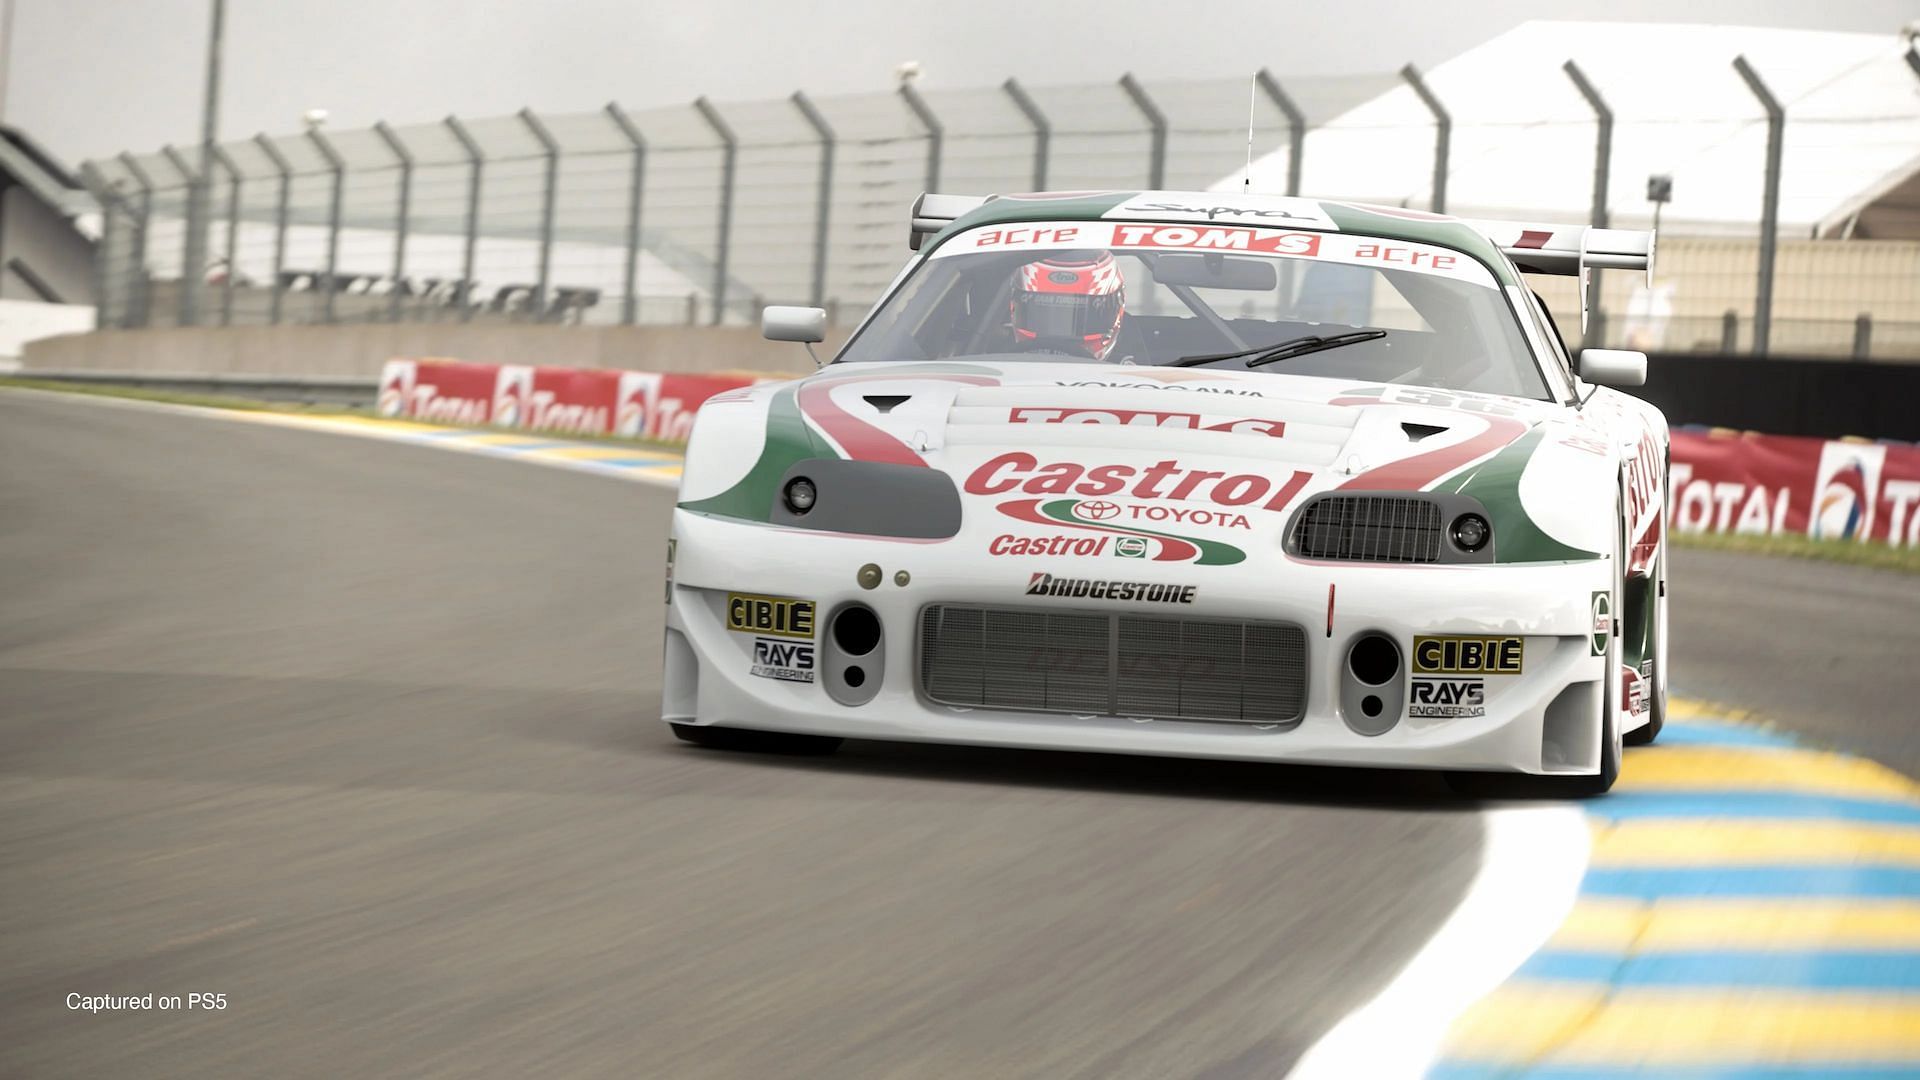 Players of Gran Turismo 7 are able to get the 1997 Toyota Supra GT500 from the pre-order bonus (Image via Polyphony Digital)